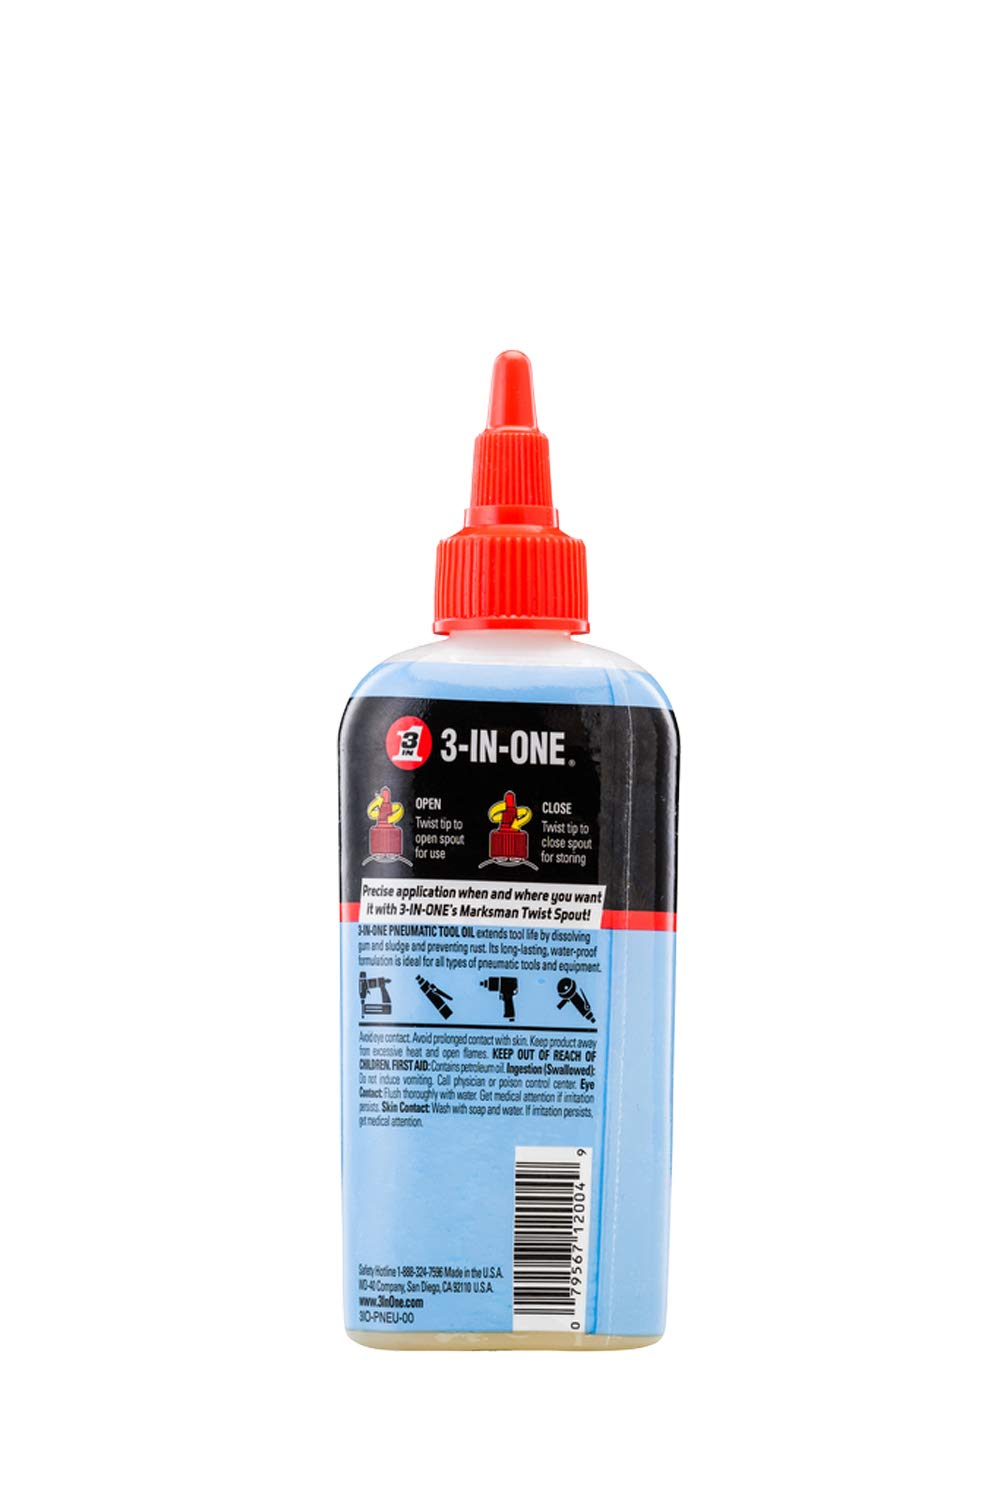 3-IN-ONE Professional Grade Pneumatic Tool Oil, 4 OZ